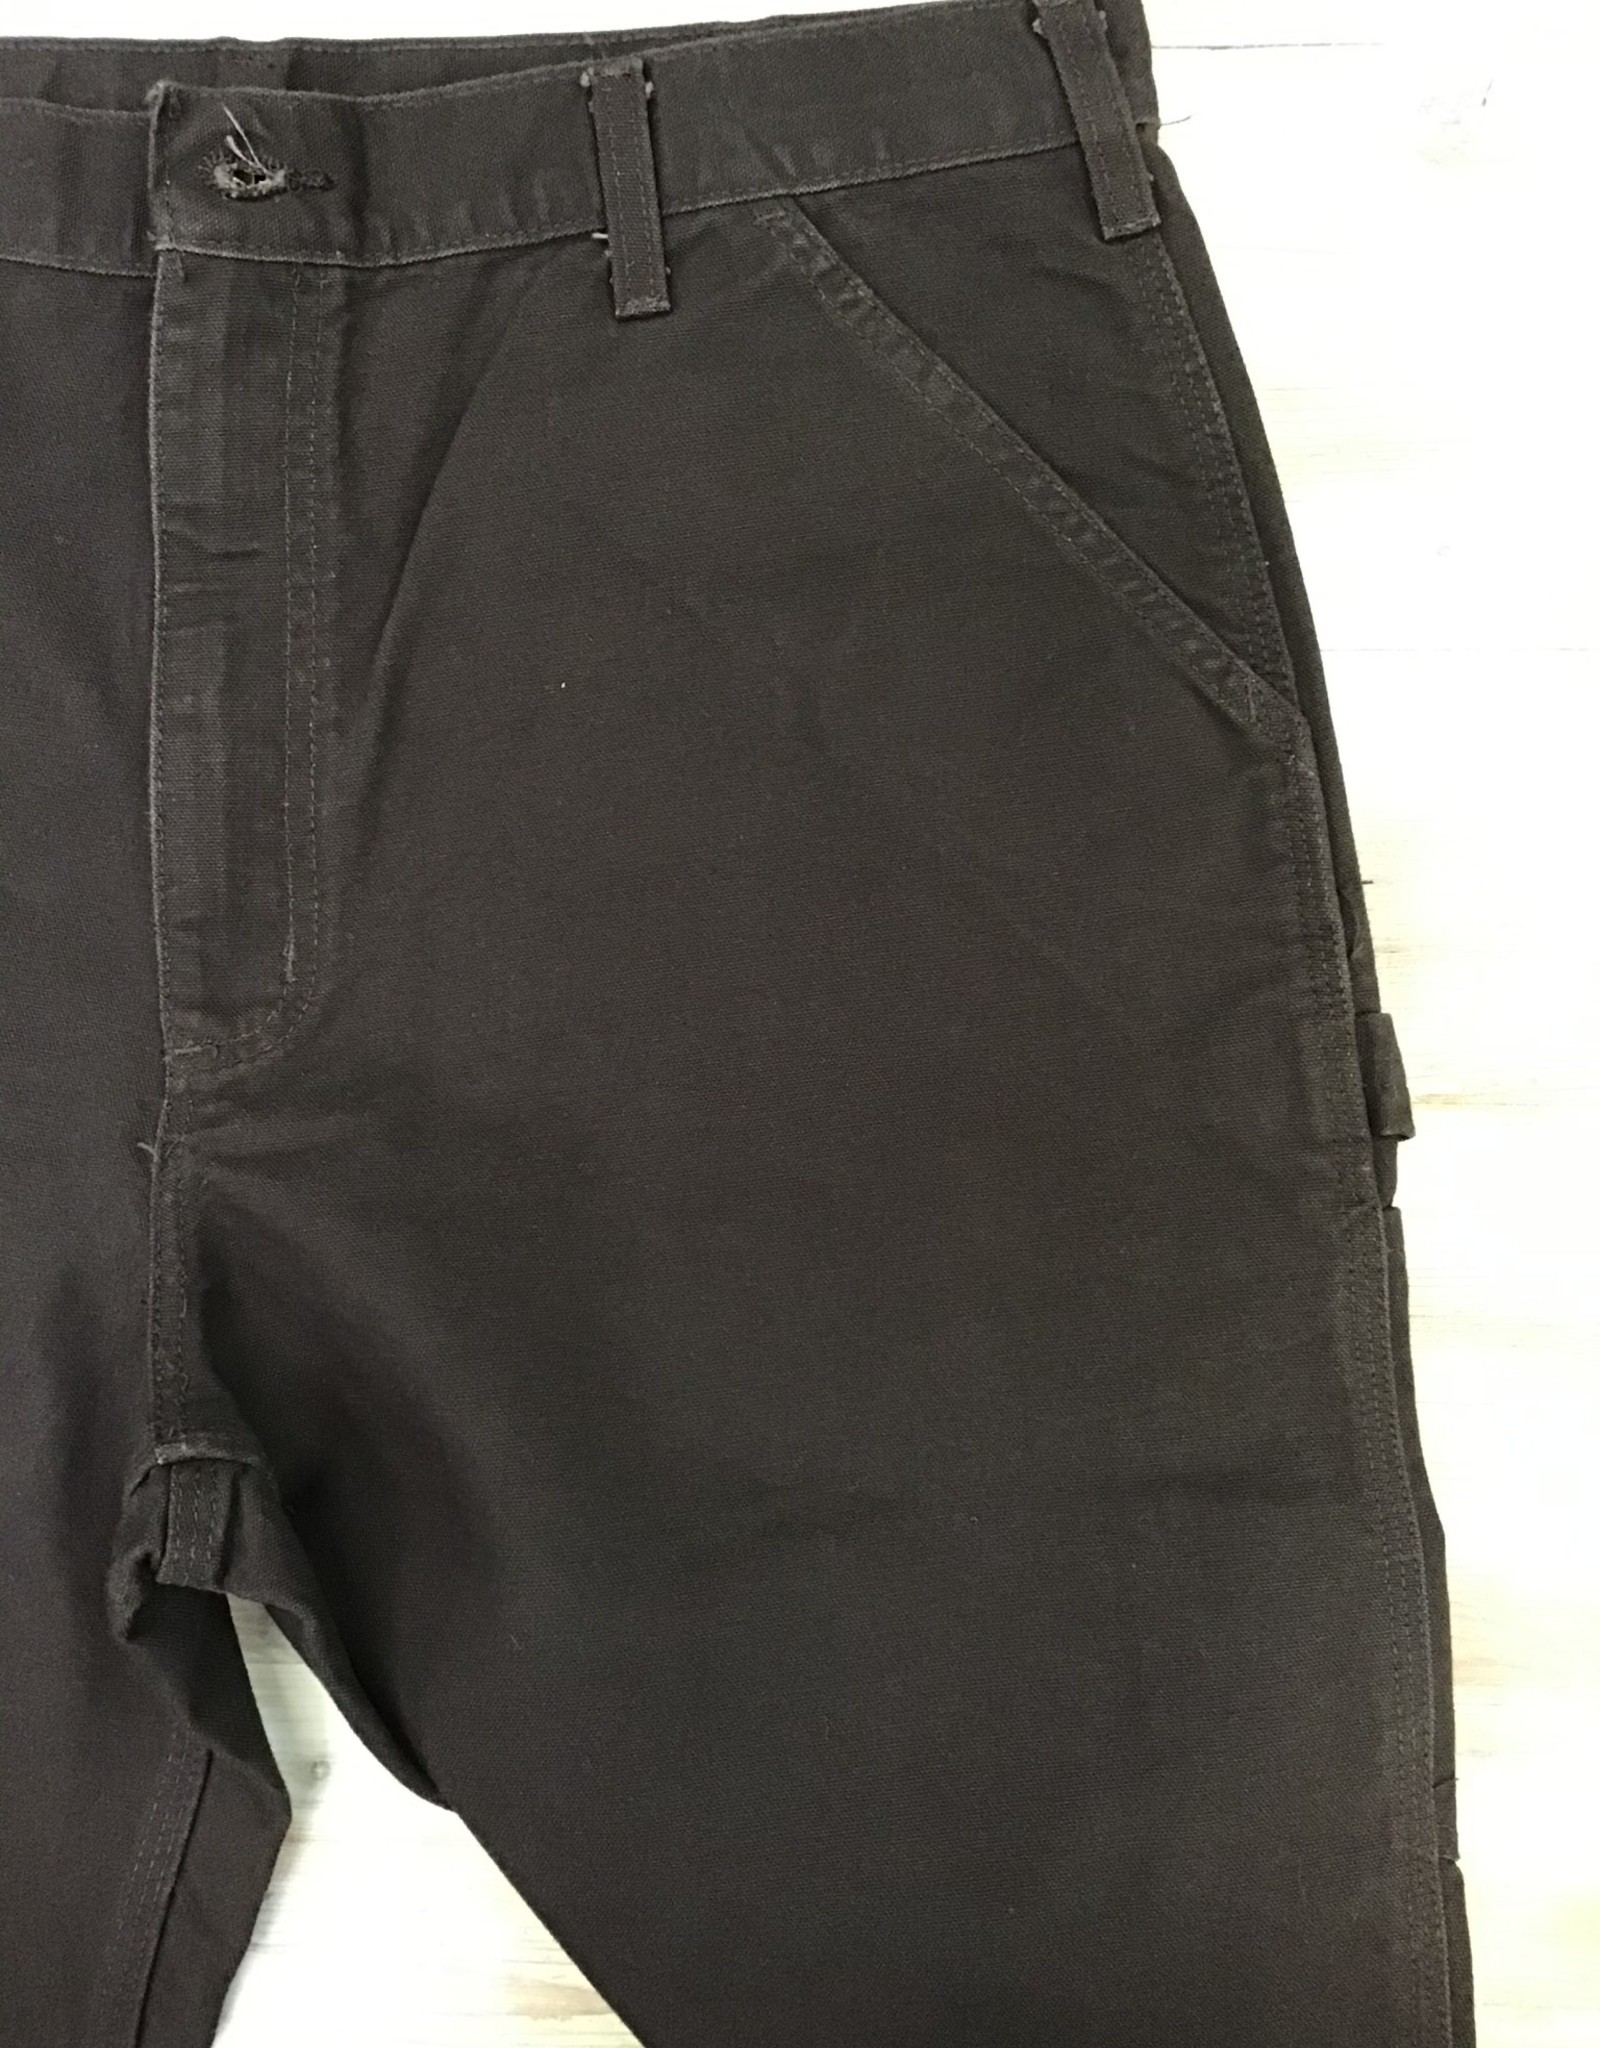 TRENDING PRODUCTS: Carhartt Double Front Work Pants — Dave's New York